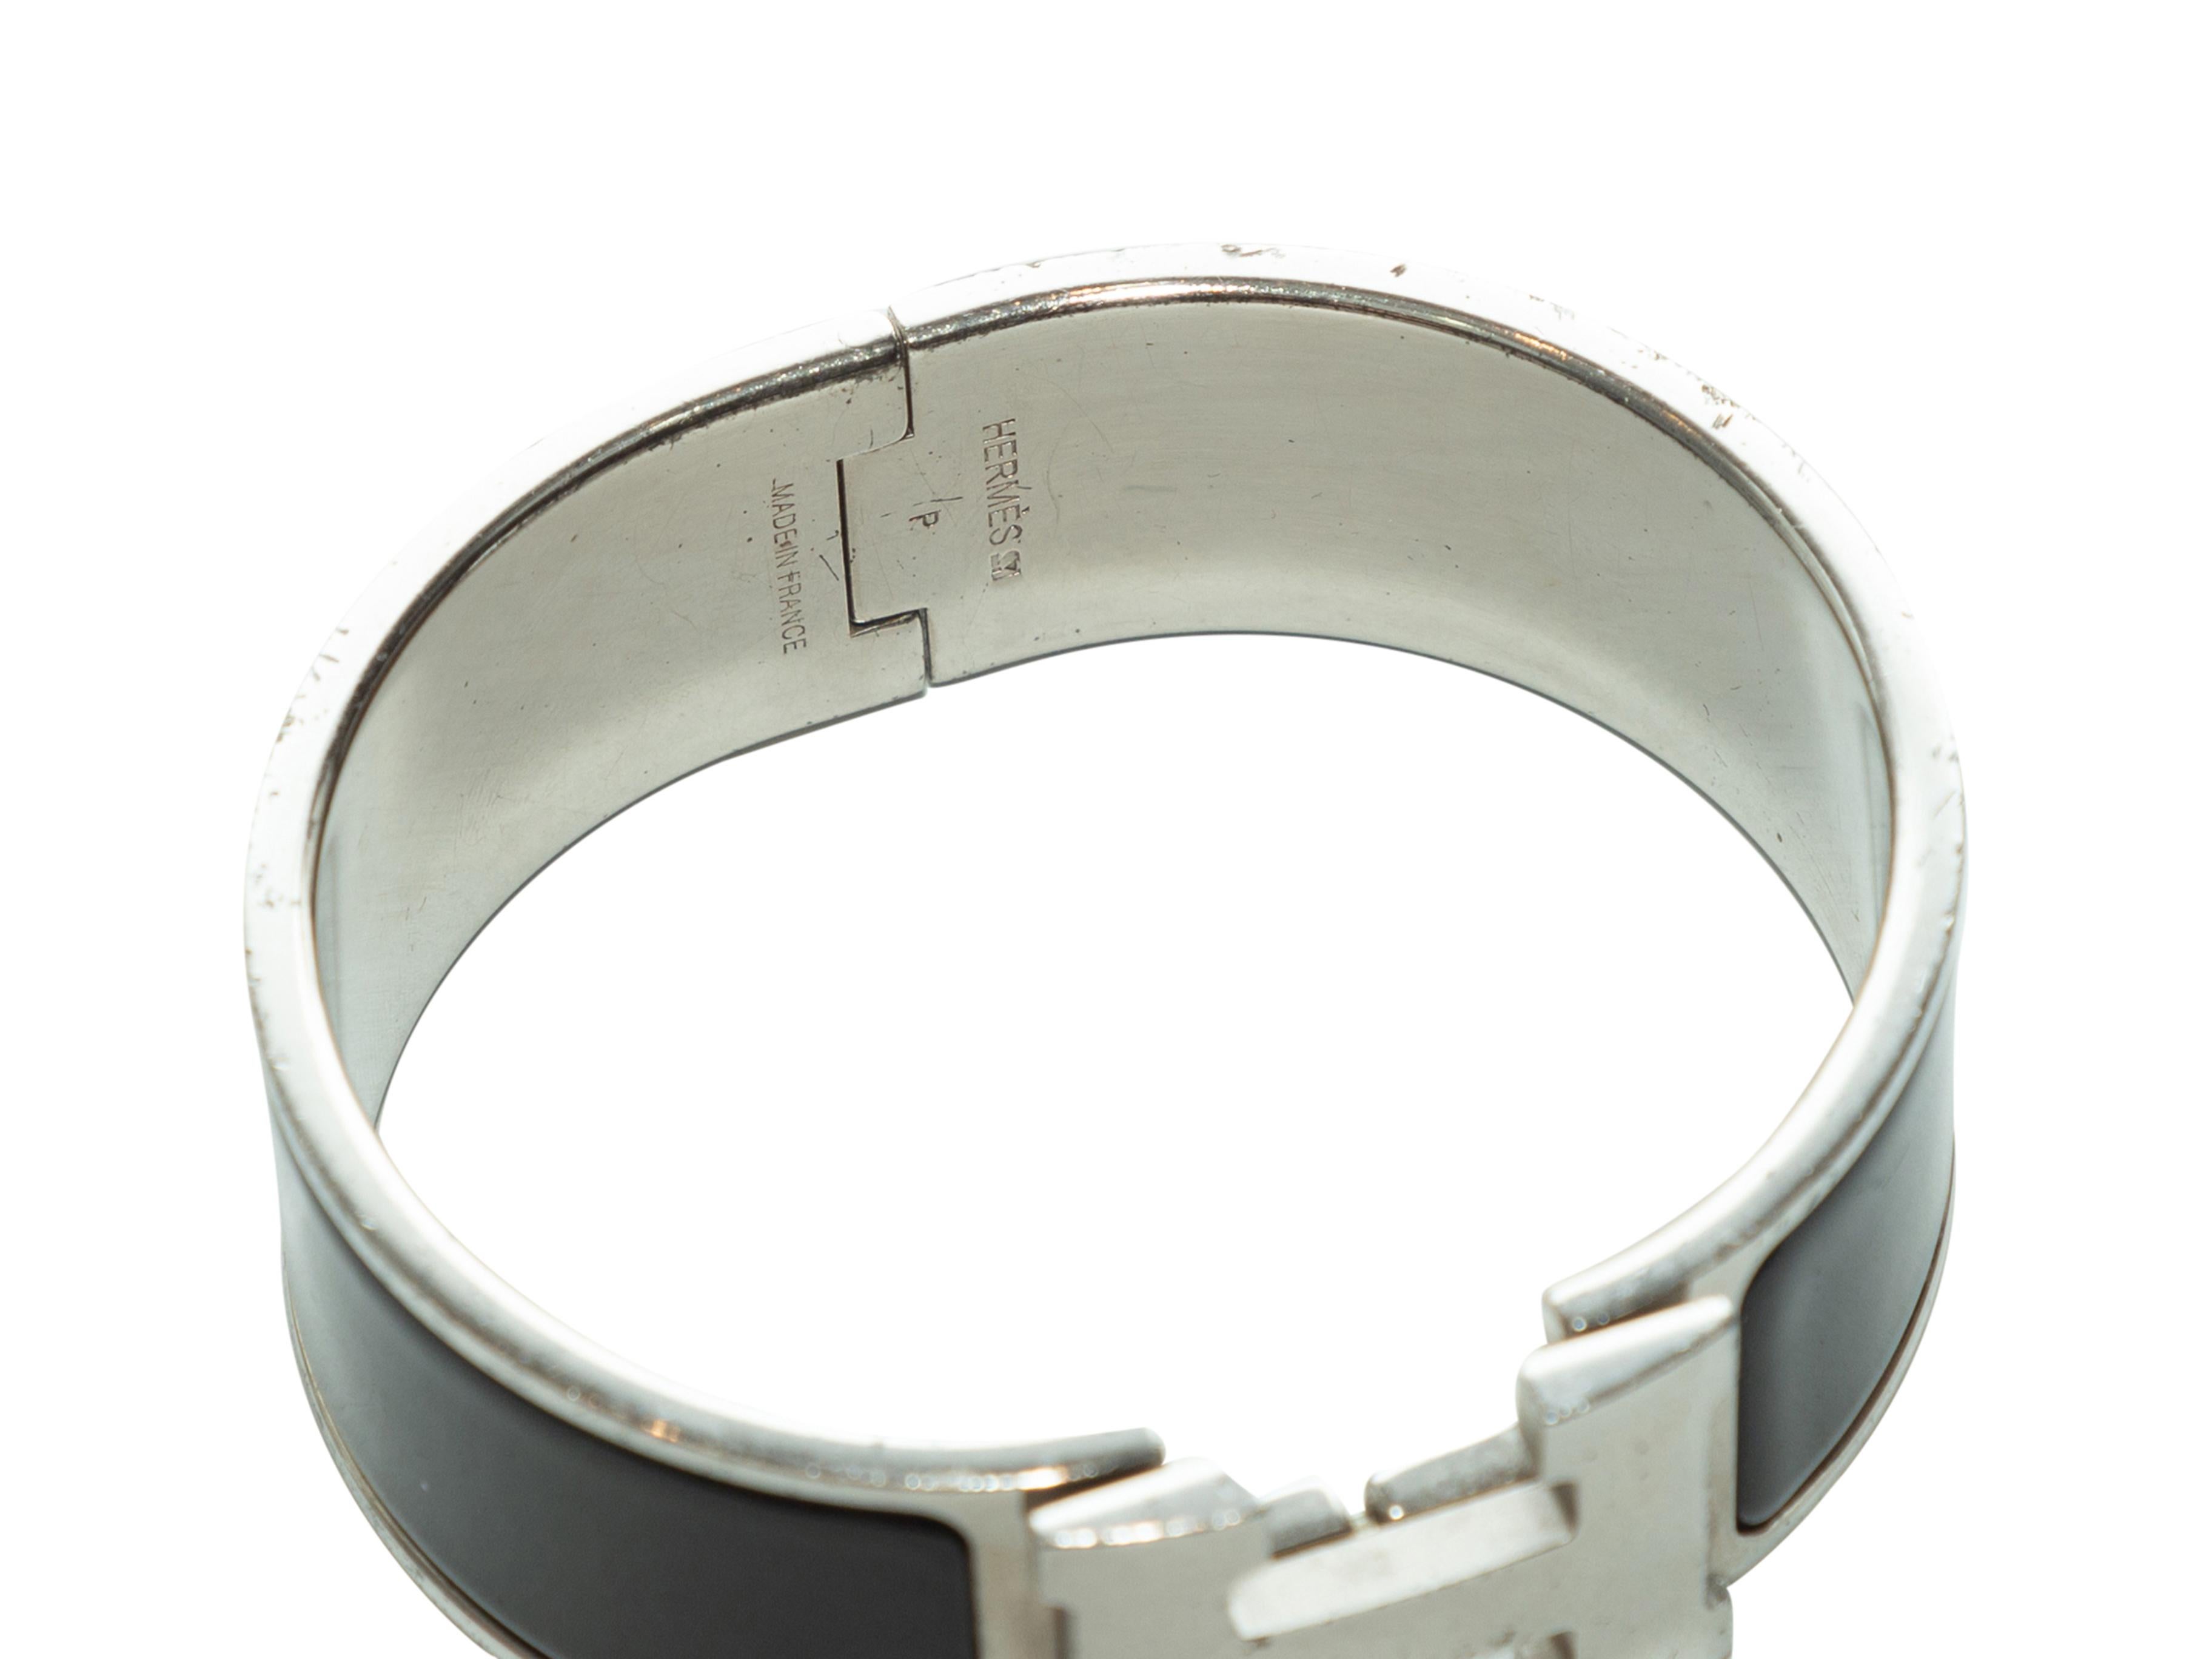 Product details: Black and leather Clic Clac logo bracelet by Hermes. H logo closure at top. 2